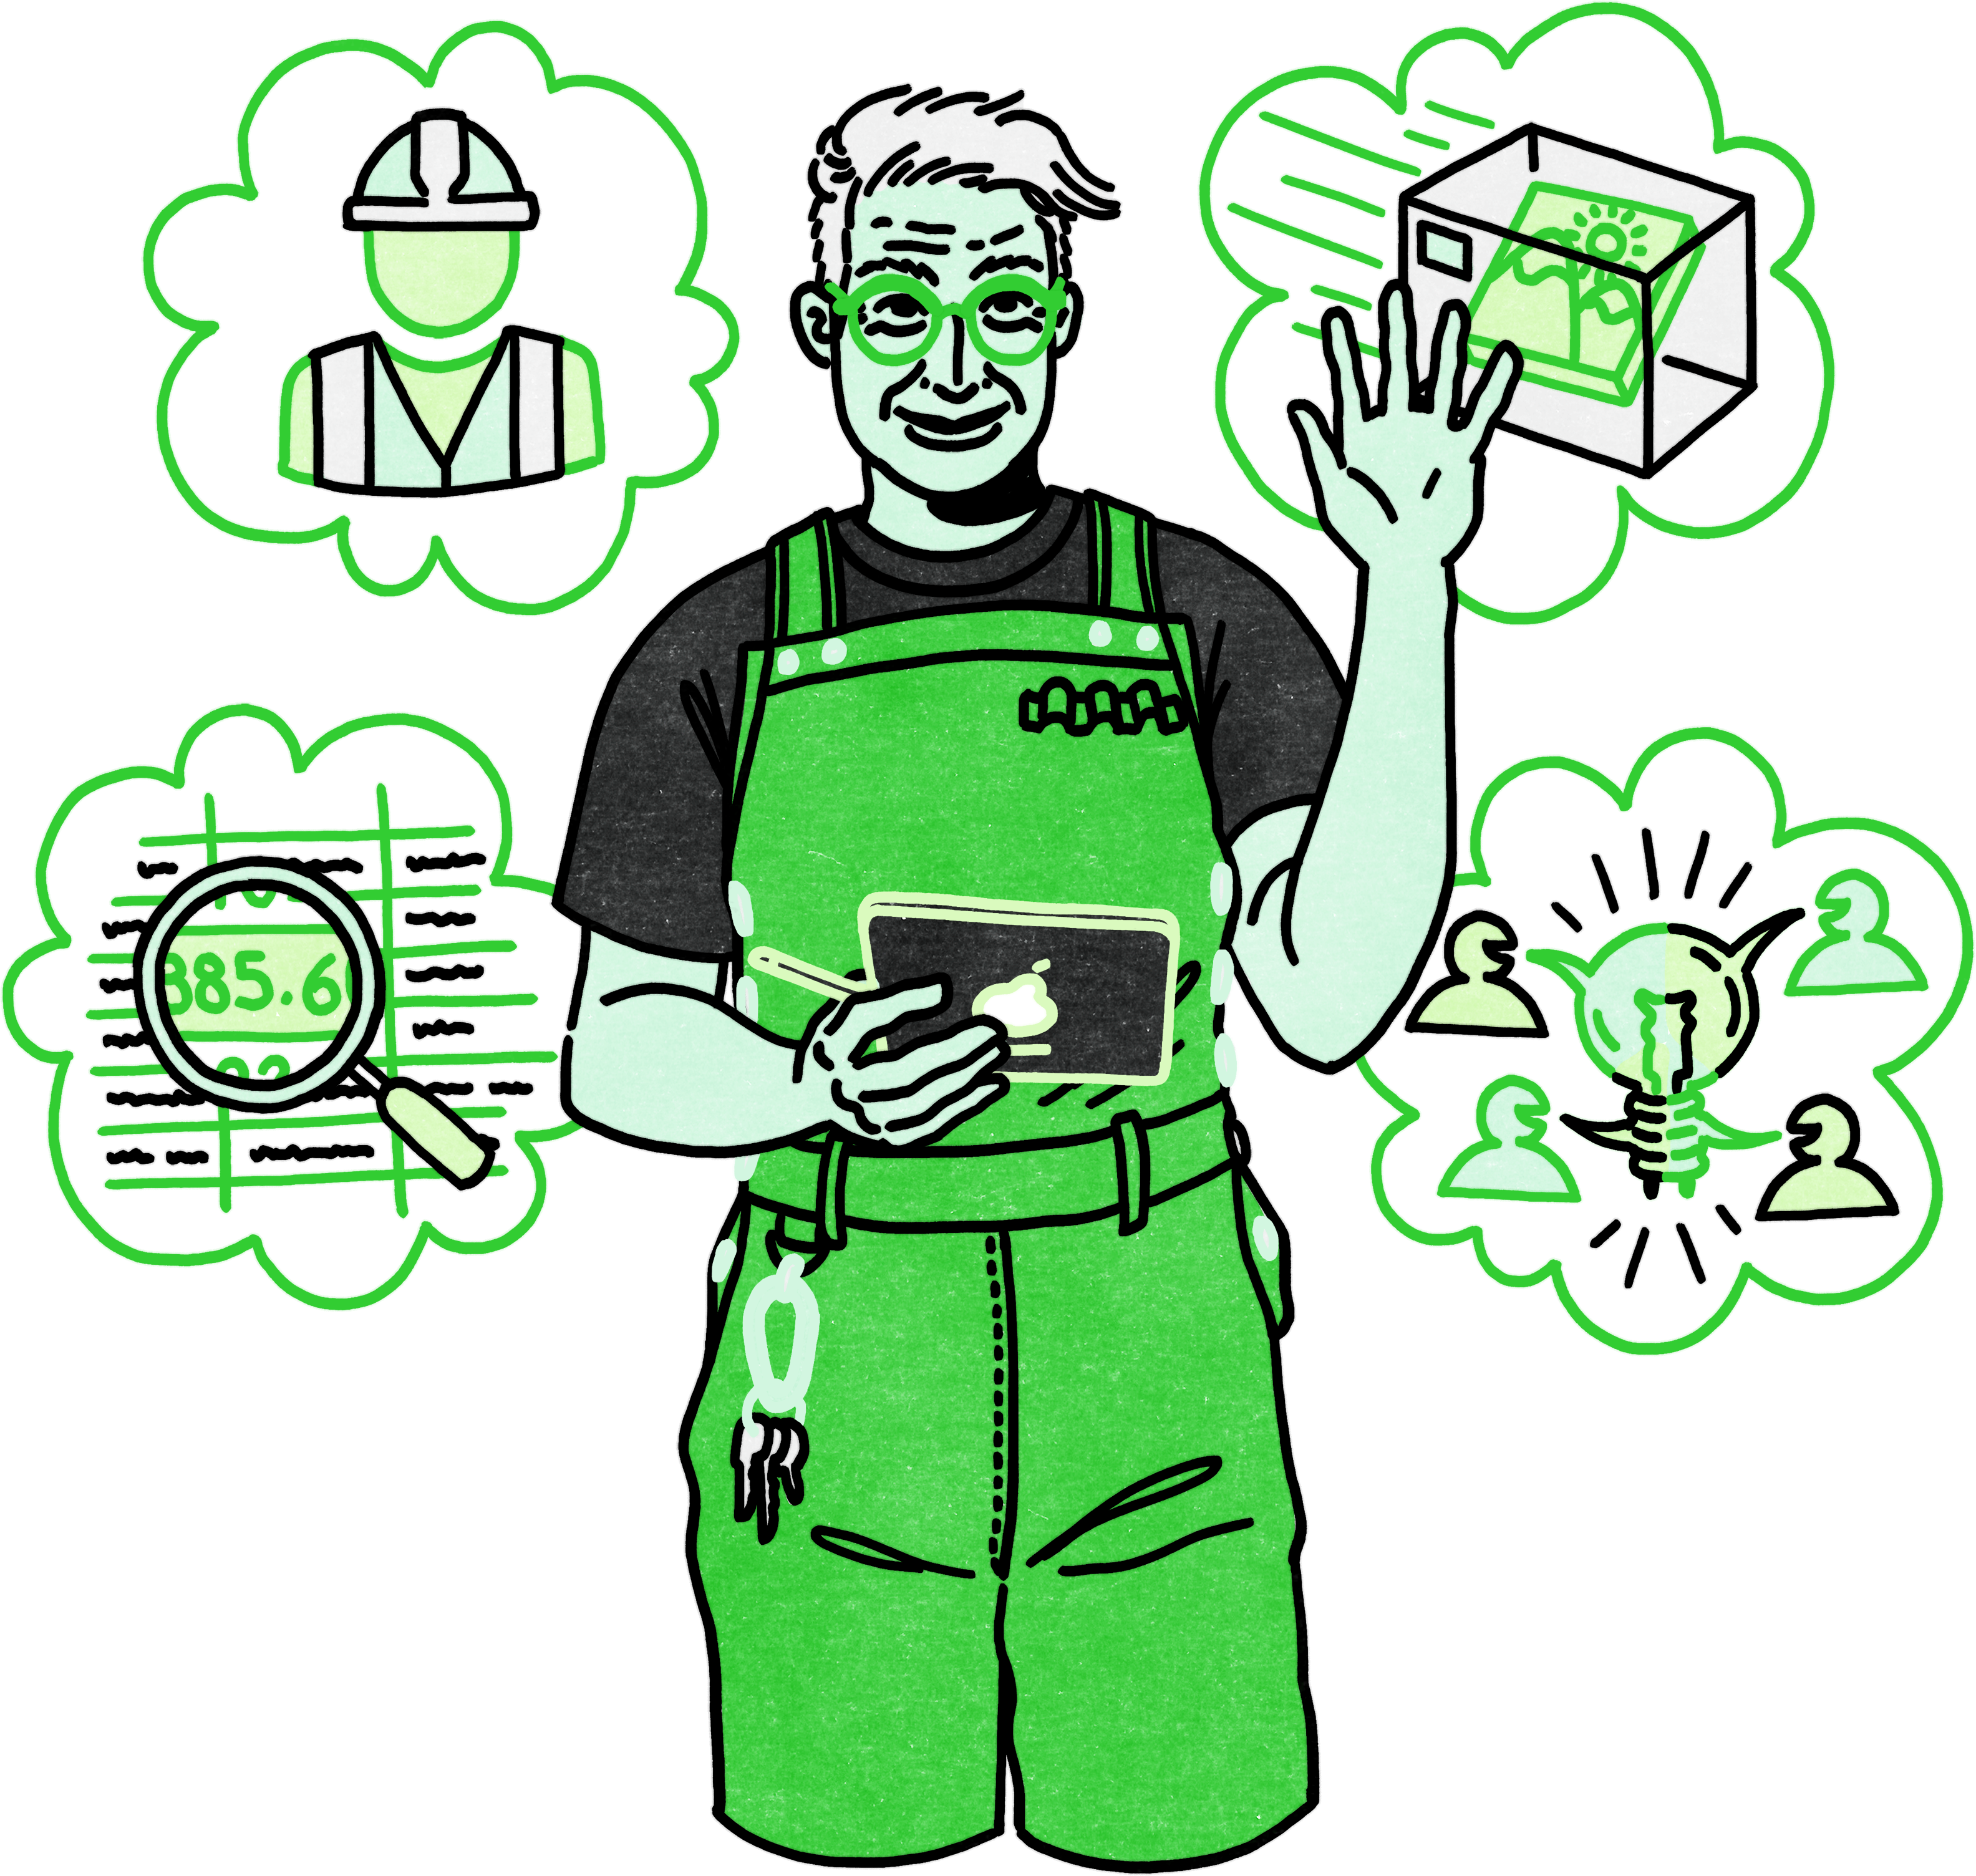 A graphic illustration in shades of green of a person in work overalls surrounded by smaller illustrations in bubbles. The smaller illustrations are a package, a spreadsheet, multiple figures and a lightbulb indicating a joint idea, and a figure in hi-vis gear. The person is smiling and waving.